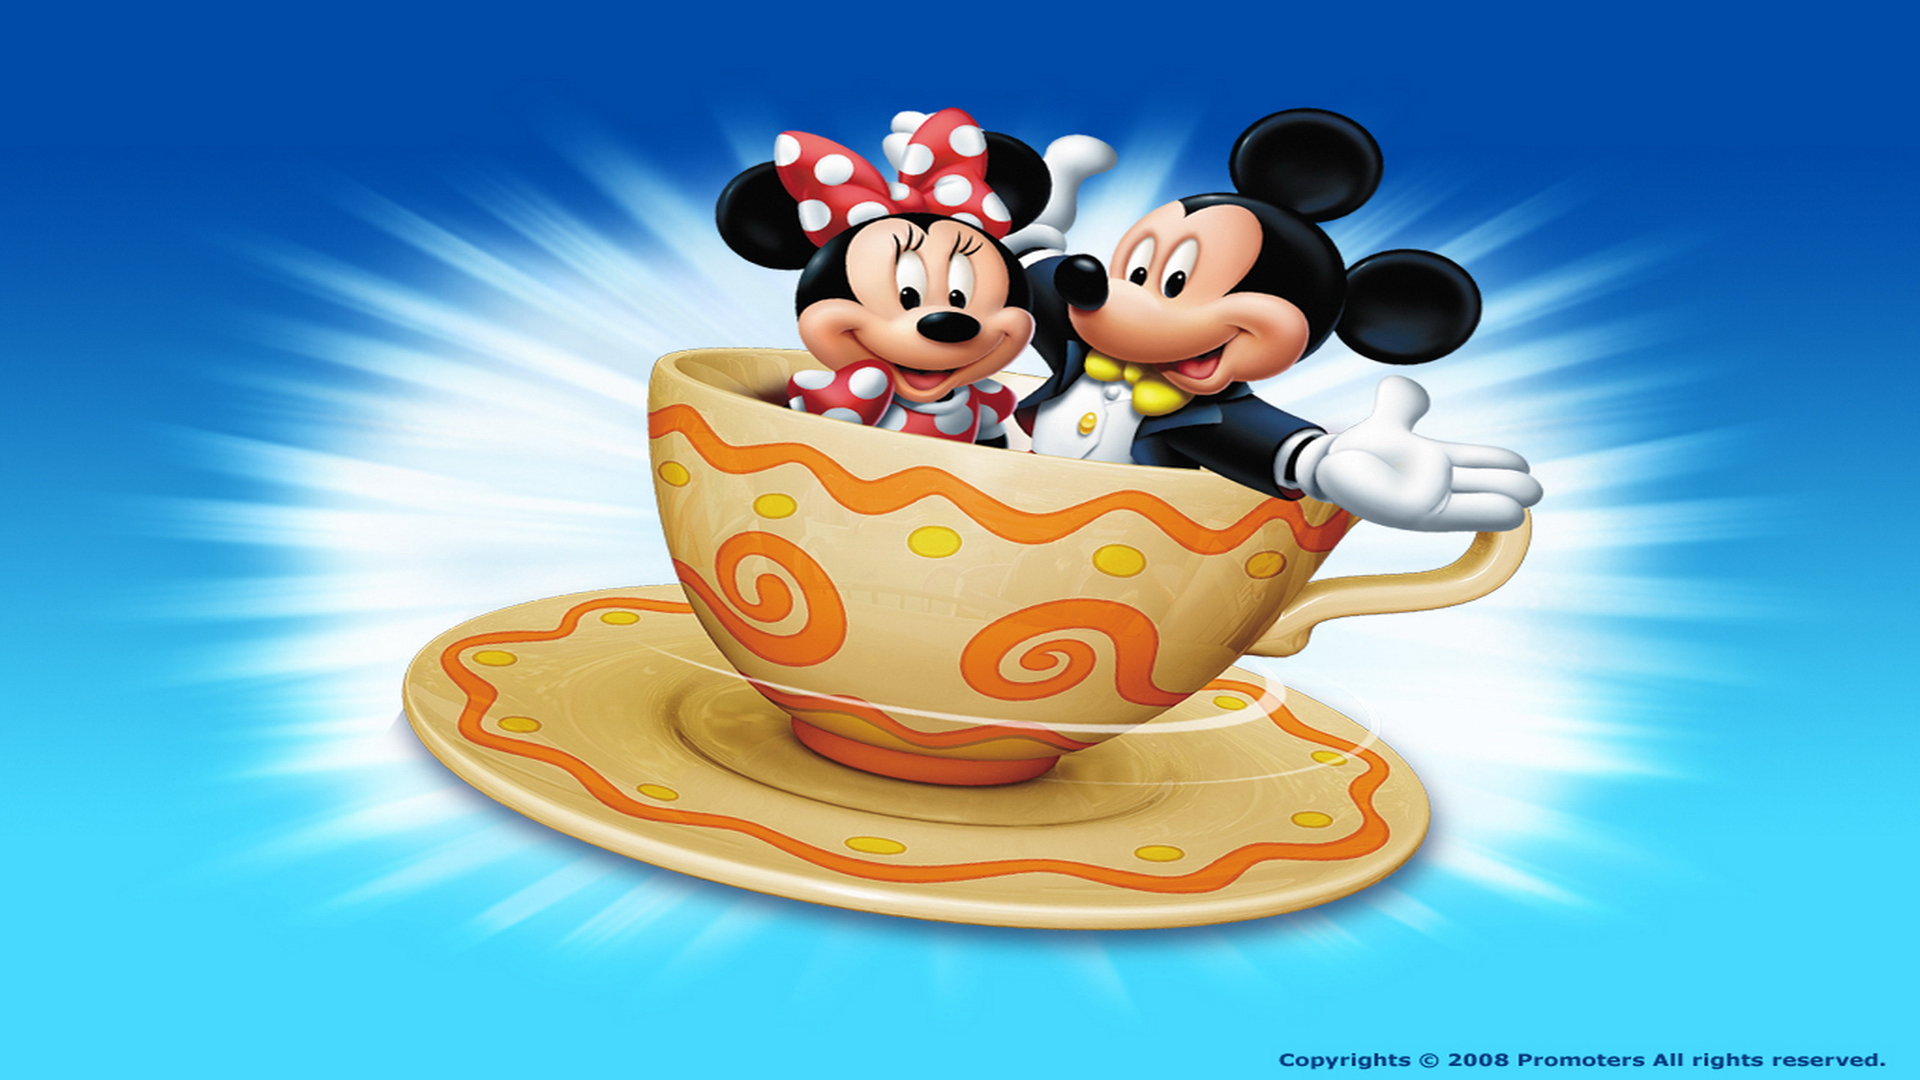 Disney Wallpaper HD Desktop Mickey And Minnie Pictures